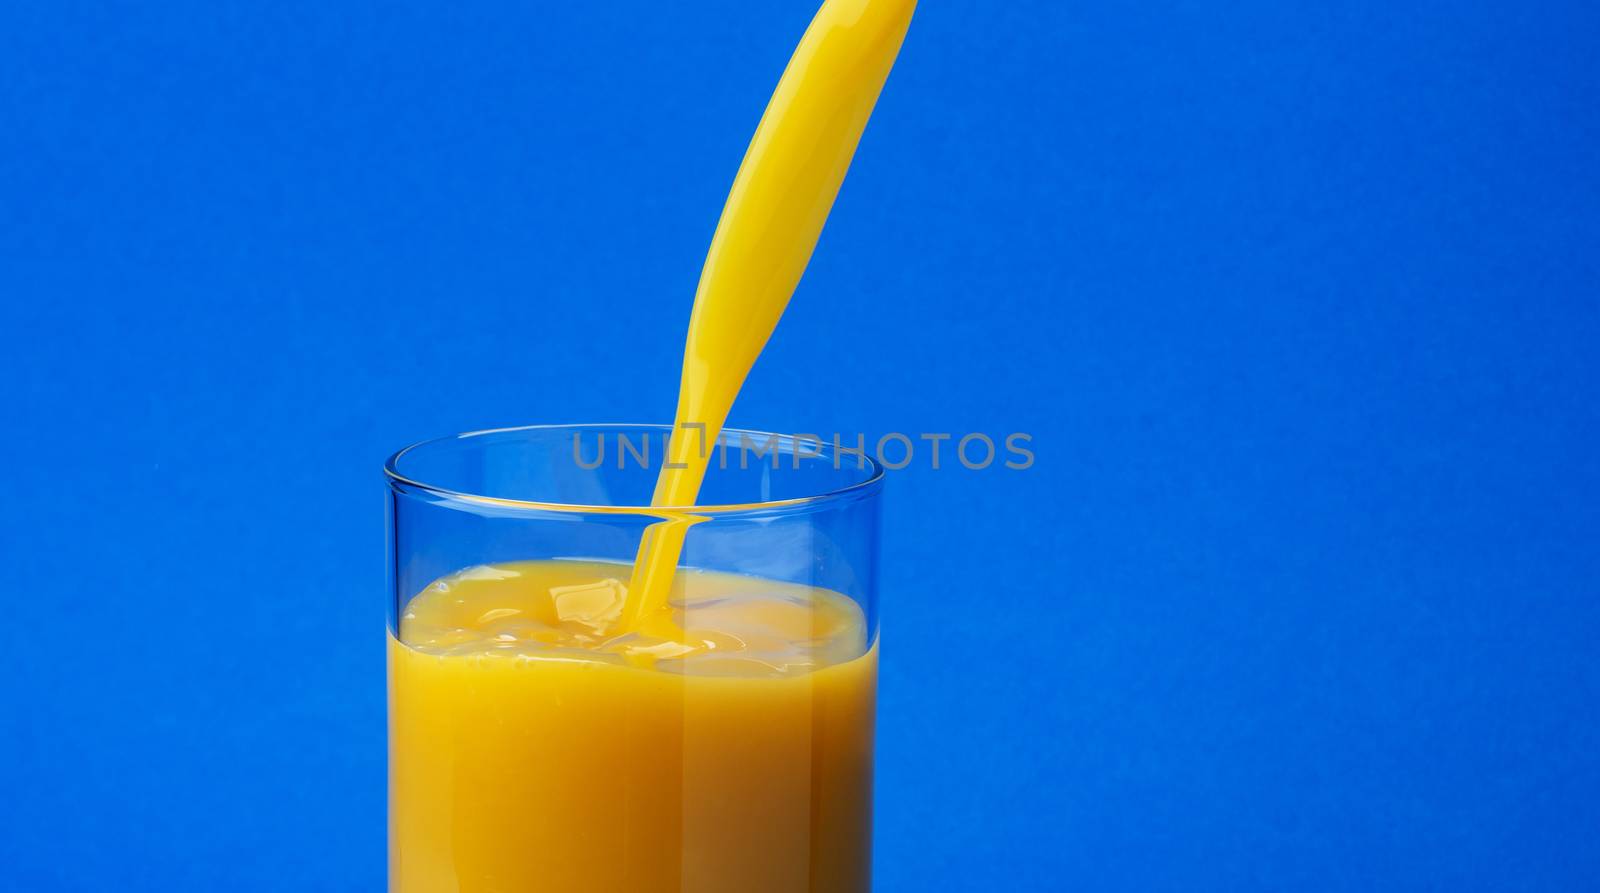 Orange juice pouring into glass, isolated on blue colour background, with copy space, healthy drink concept, close-up